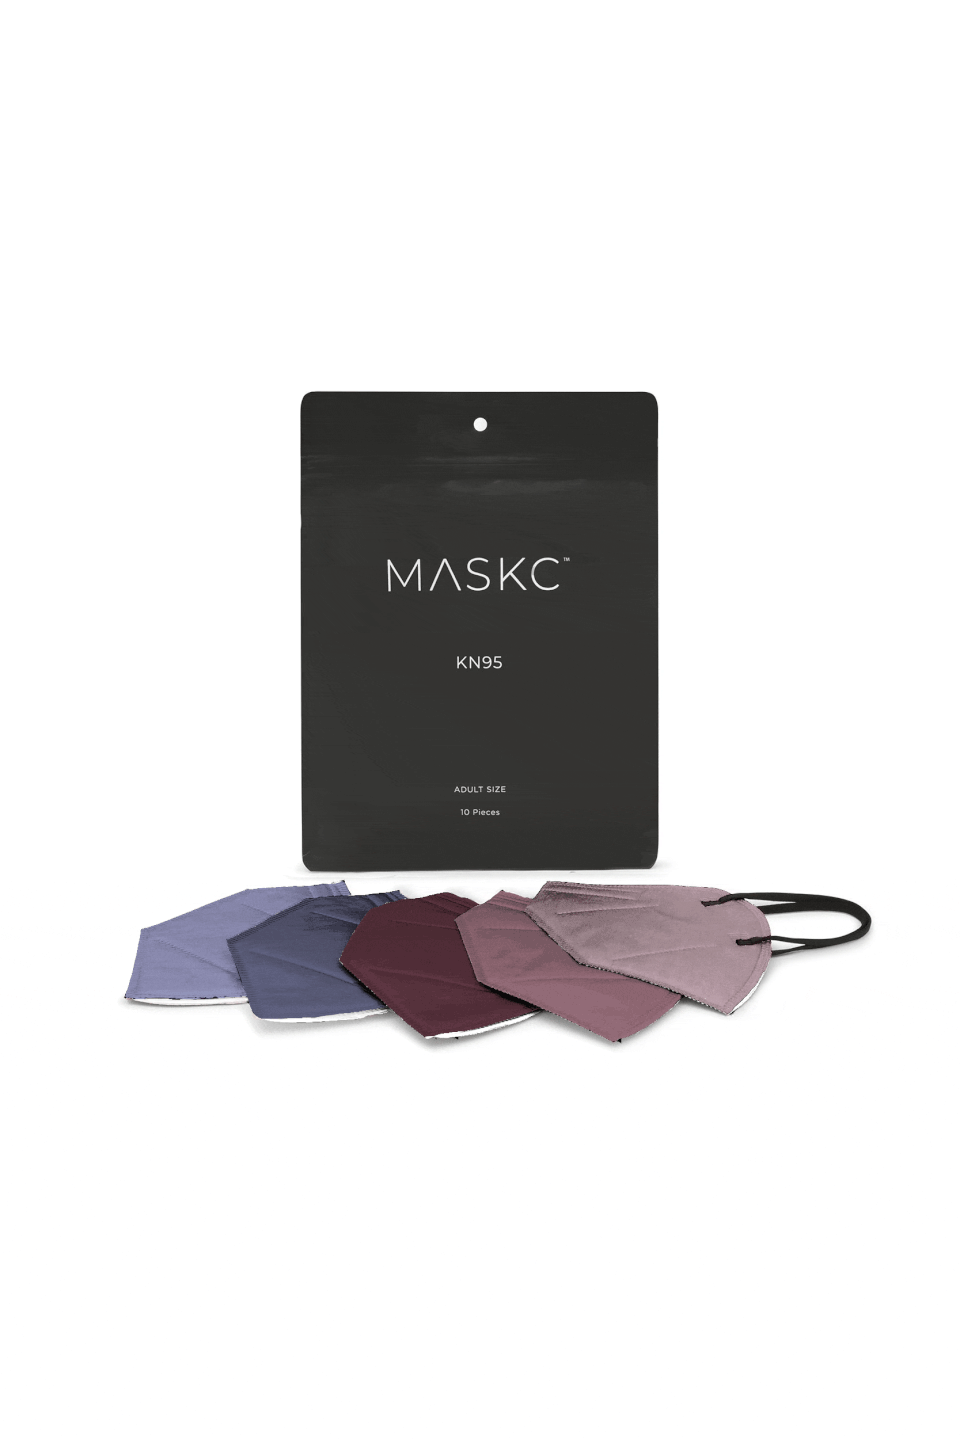 <p>If purple is your favorite color, you'll love these <span>MASKC Vogue Variety KN95 Face Masks</span> ($36 for 10). You'll receive two in each color.</p>